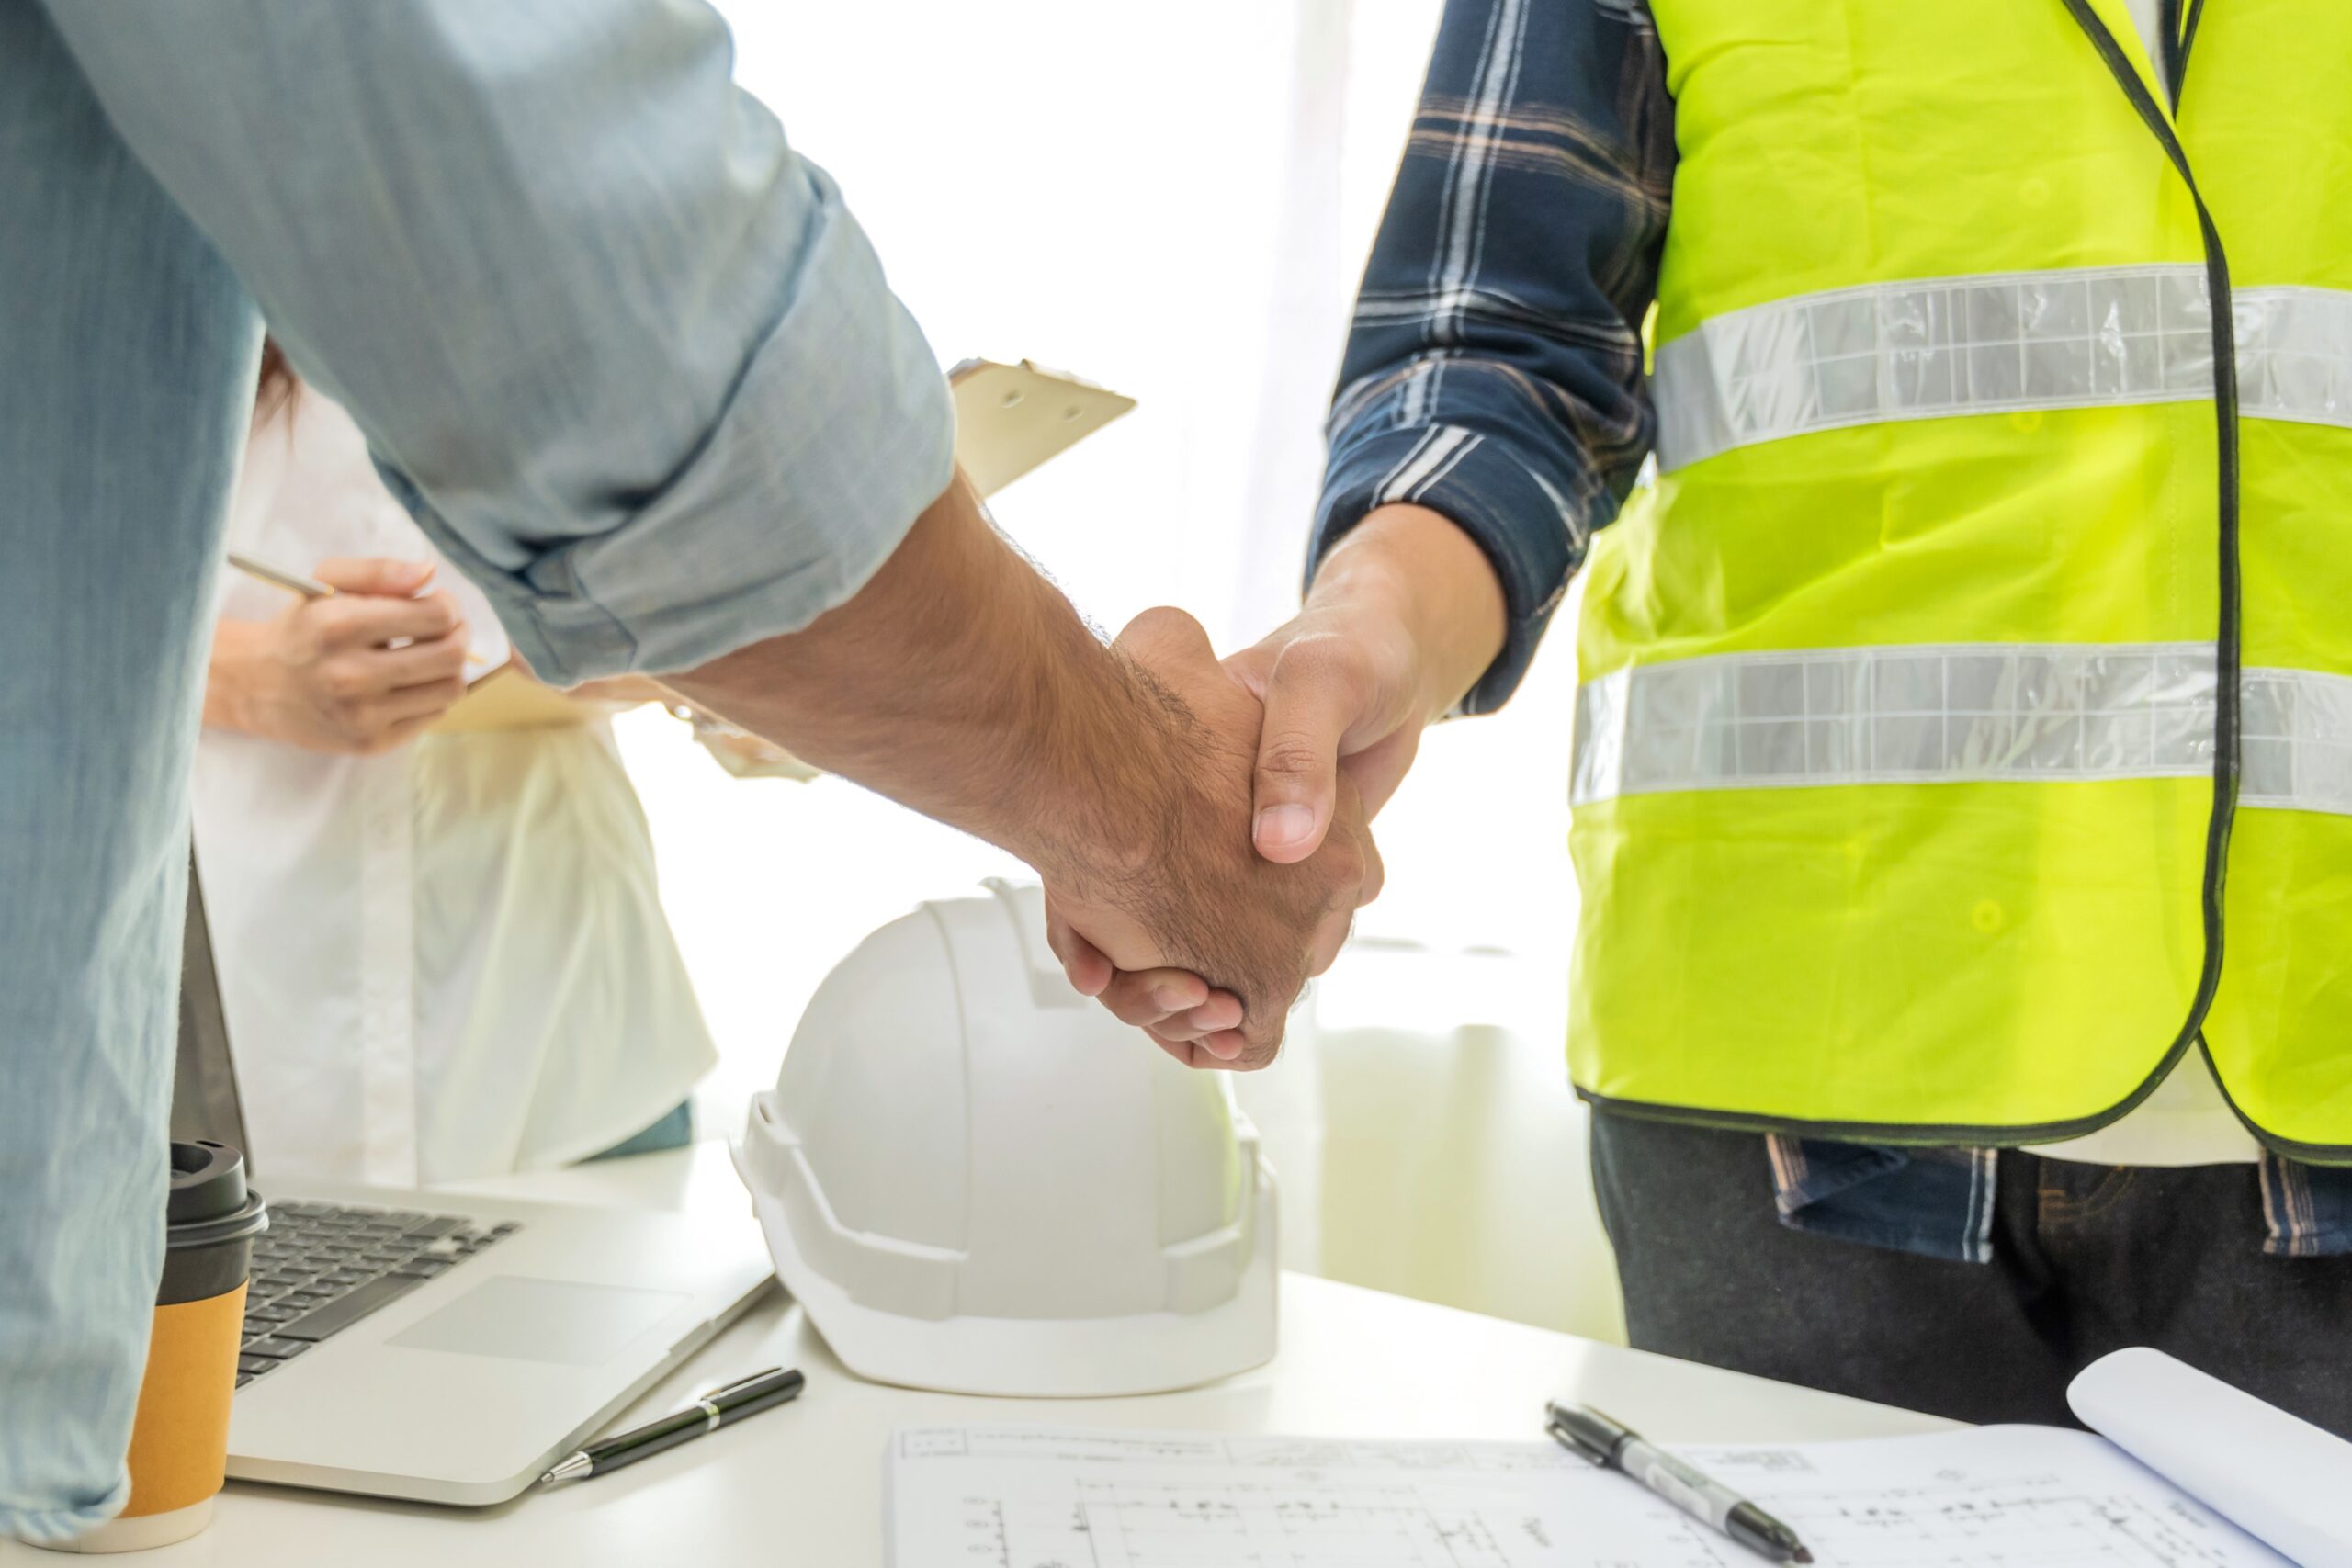 Man in yellow construction vest shakes hand of man in button up shirt